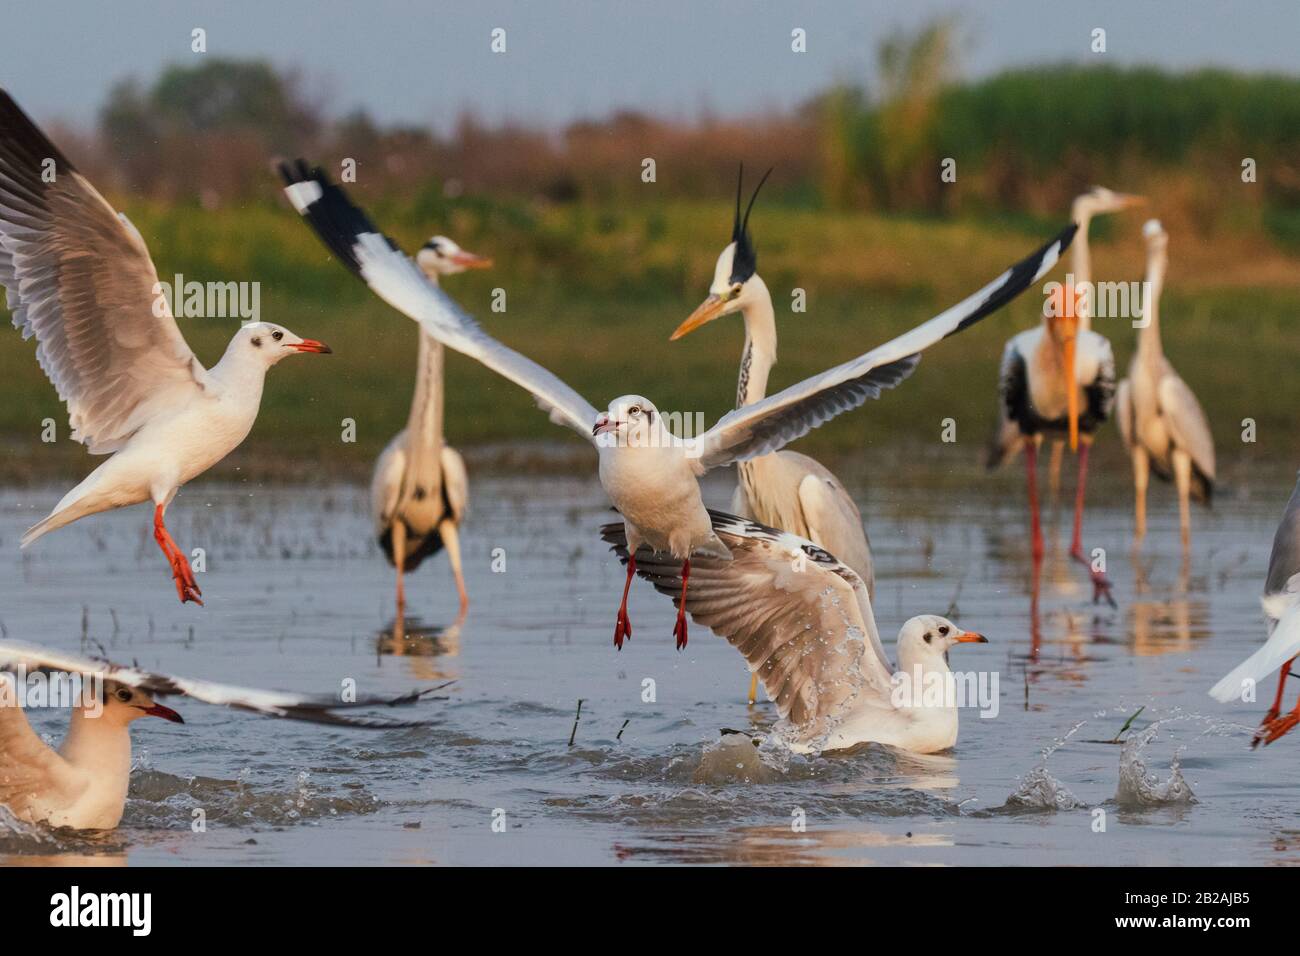 Painted stork, grey heron, and seagulls in a lake Stock Photo